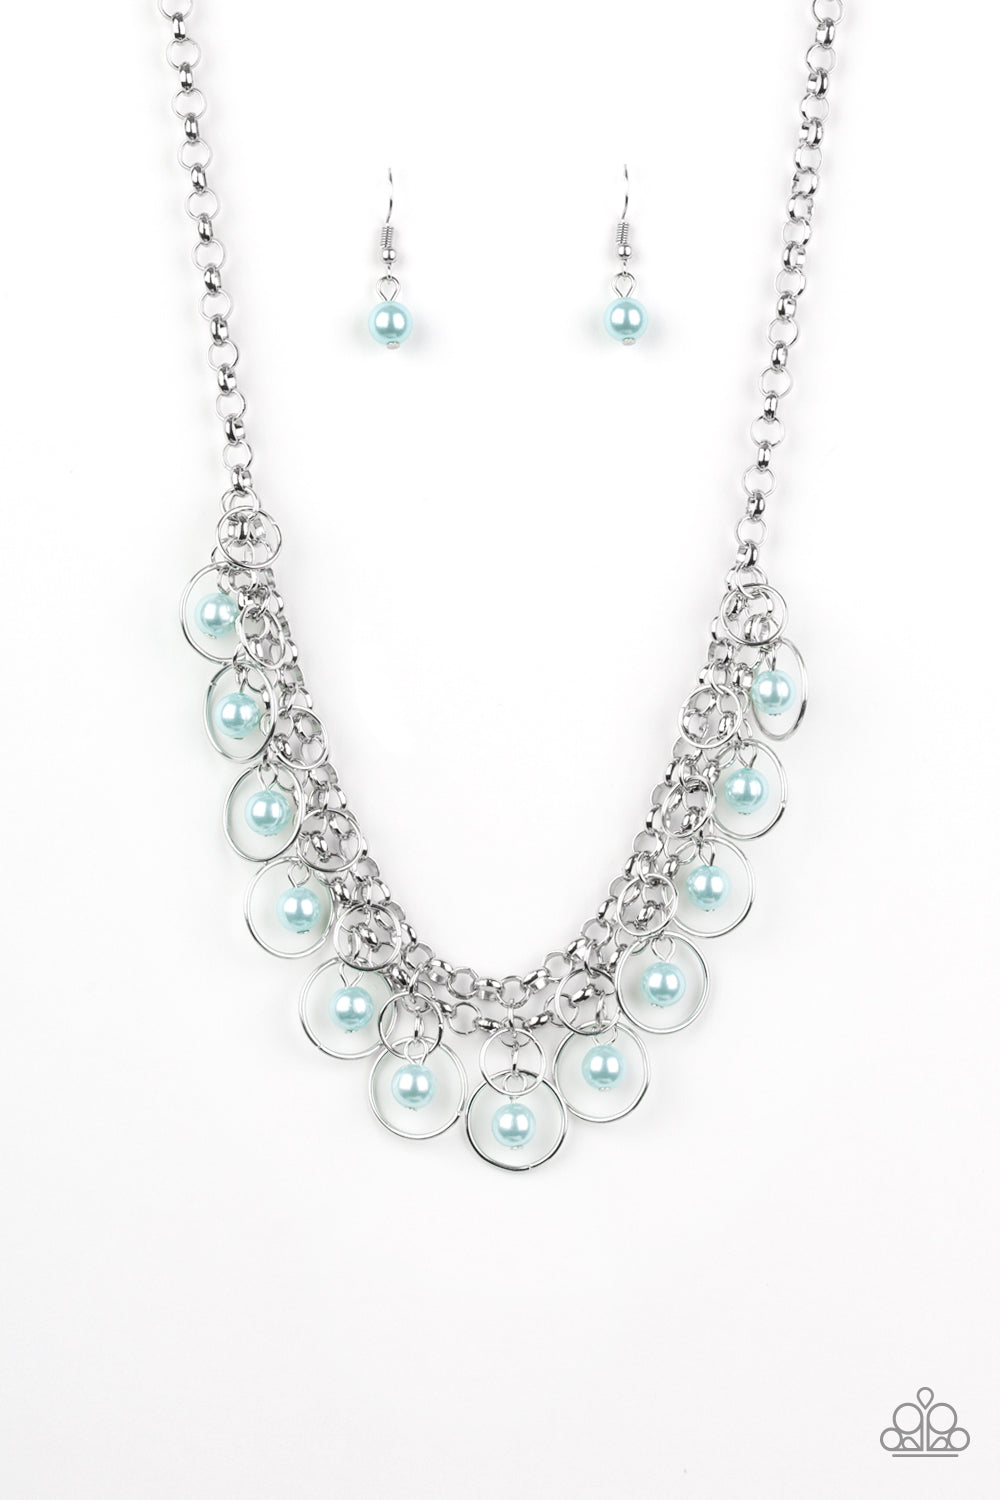 Party Time - Blue and Silver Fashion Necklace  - Paparazzi Accessories - A collection of airy silver hoops and bubbly blue pearls swing from the bottom of interlocking silver chains, creating a flirtatious fringe below the collar. Features an adjustable clasp closure. Sold as one individual necklace.